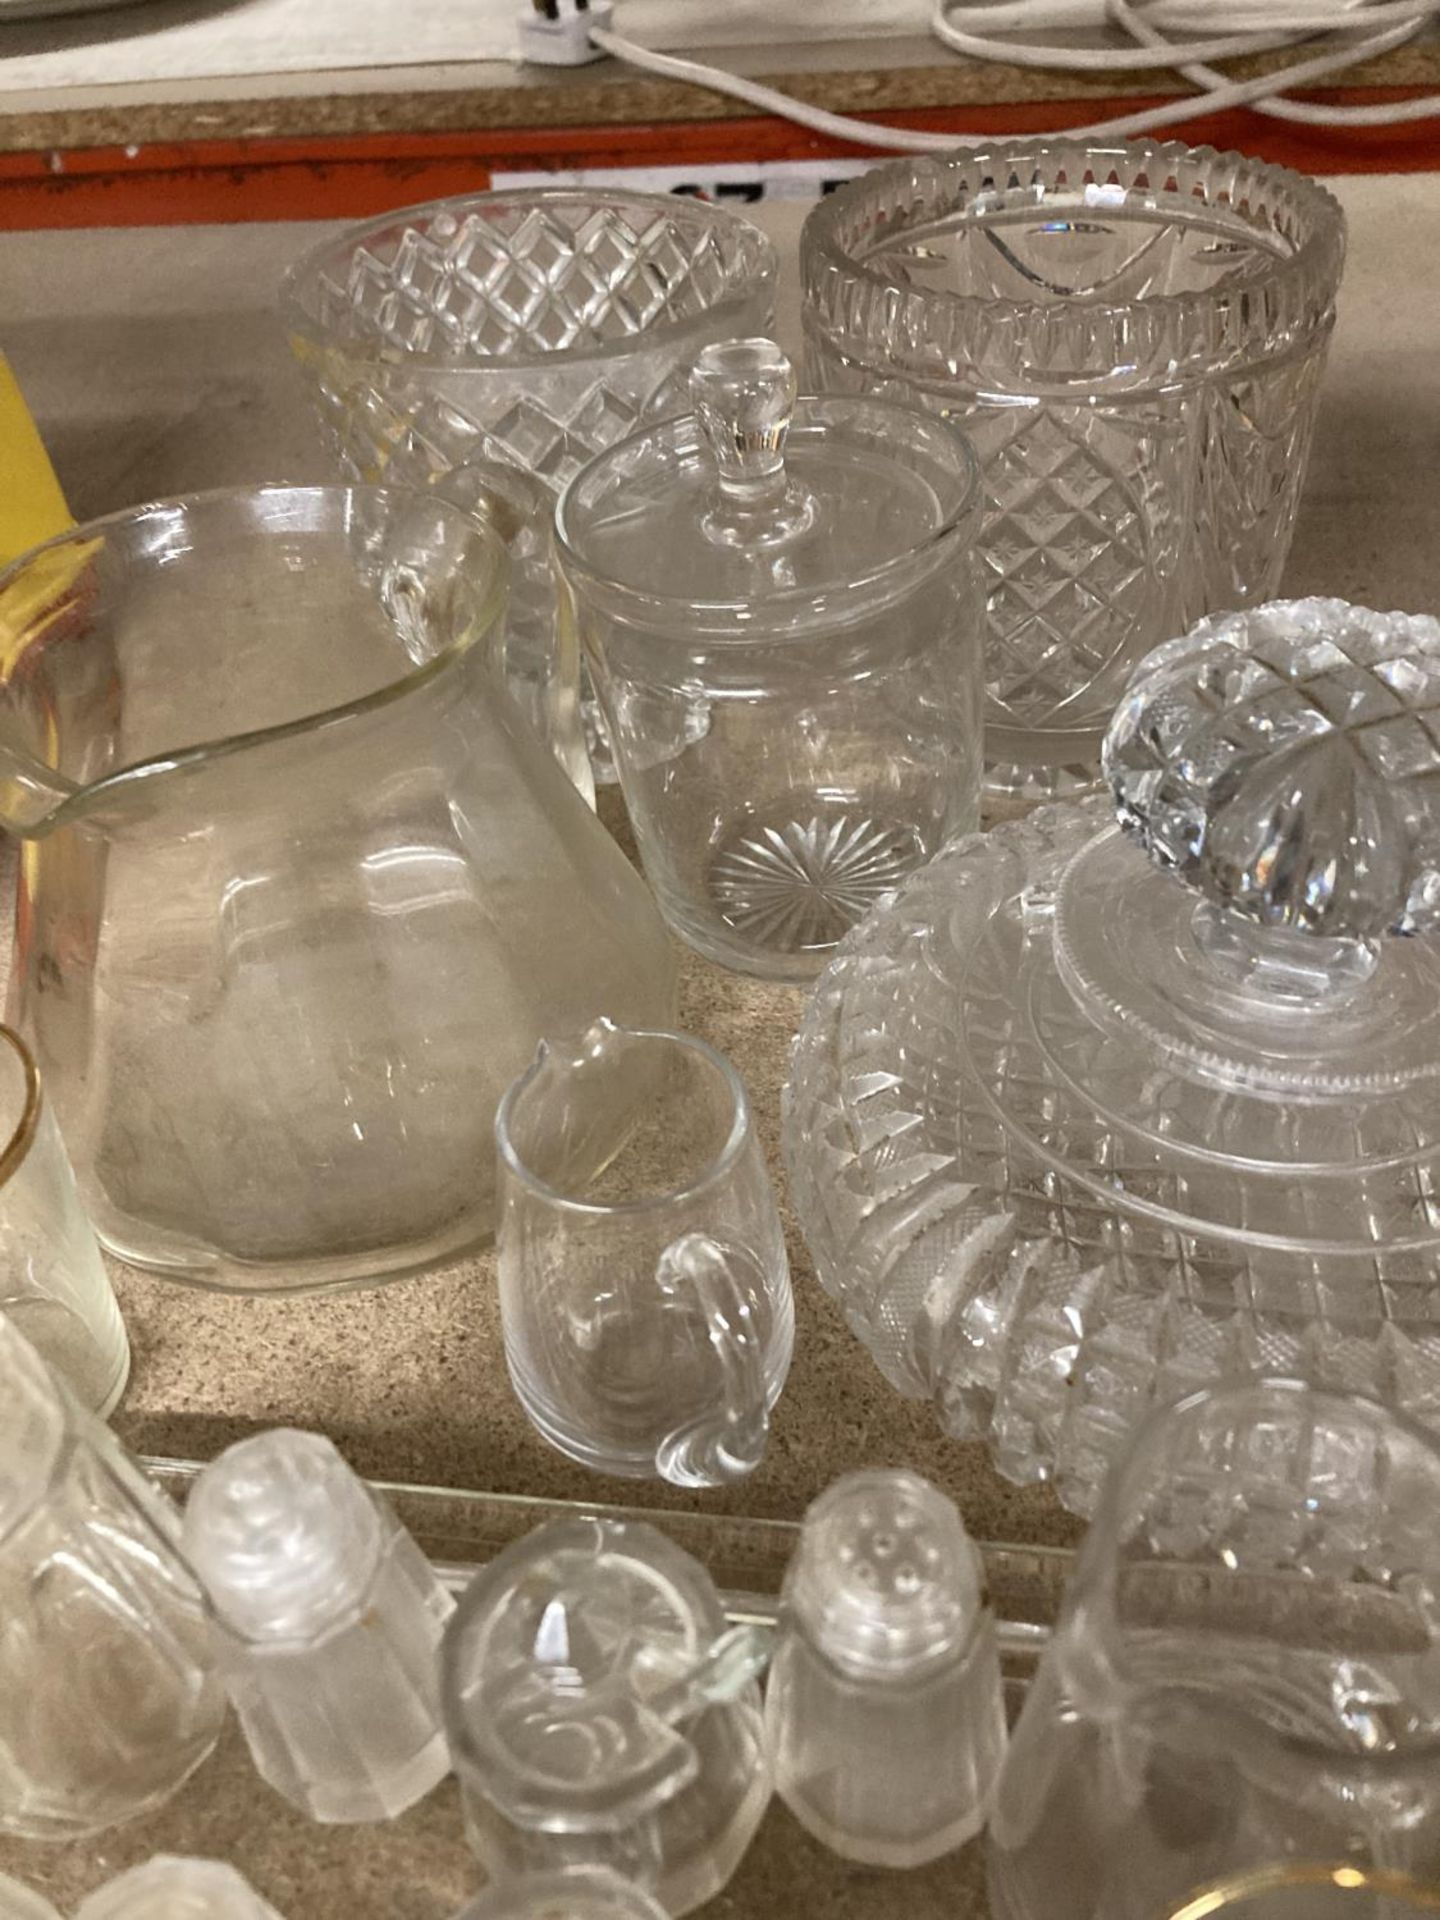 A QUANTITY OF GLASSWARE TO INCLUDE JUGS, SMALL DECANTER, PRESERVE POT, GLASSES, ETC - Image 4 of 4